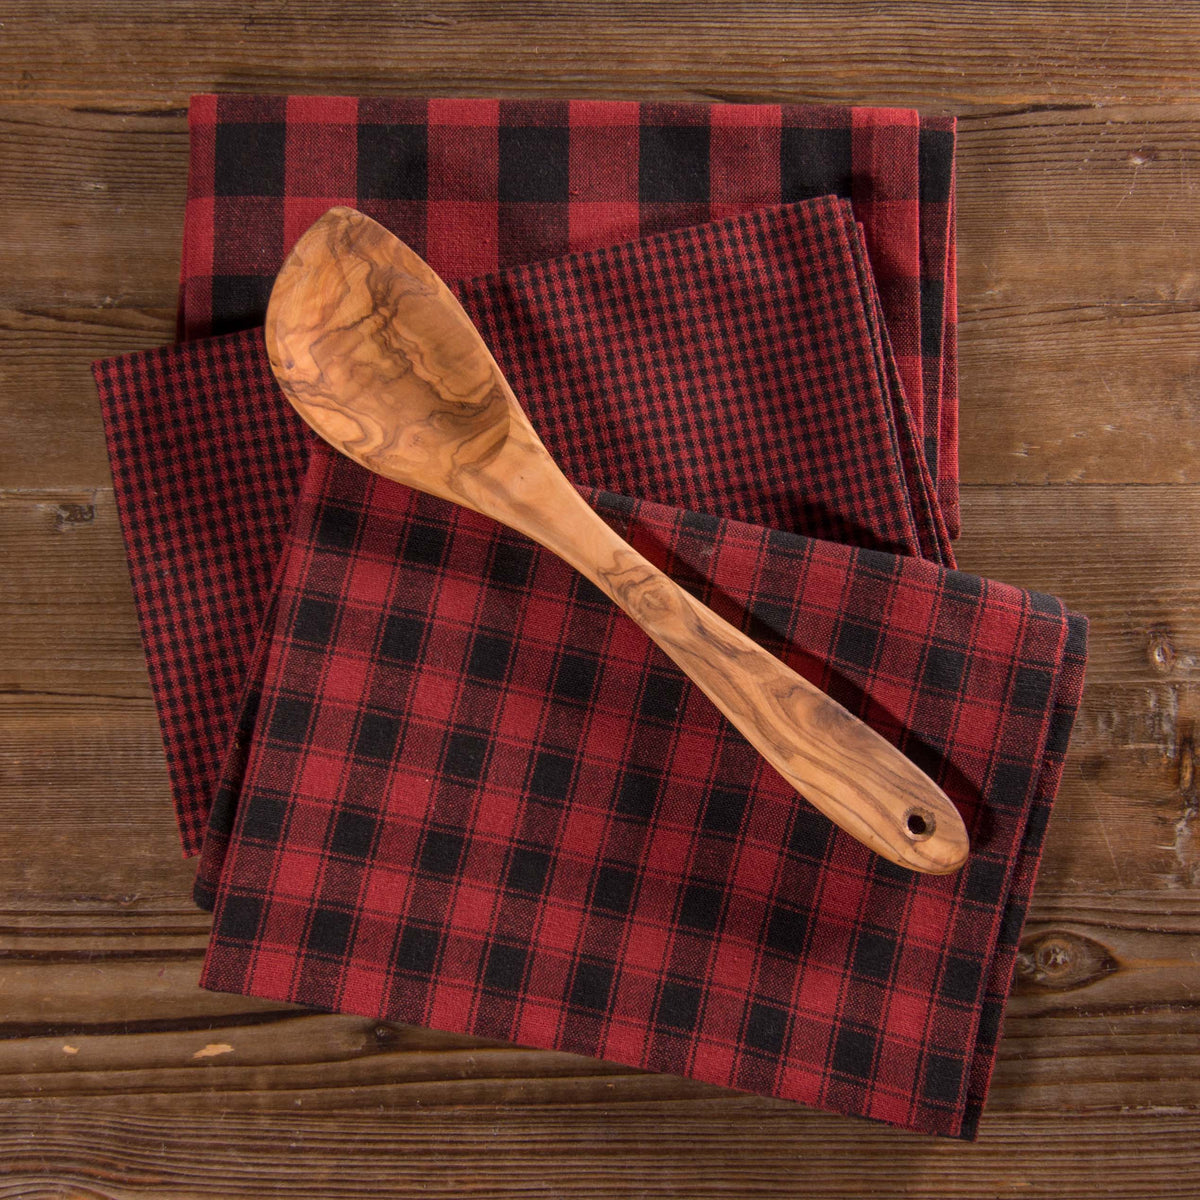 Dunroven House Tea Towel Red and Black Check Series